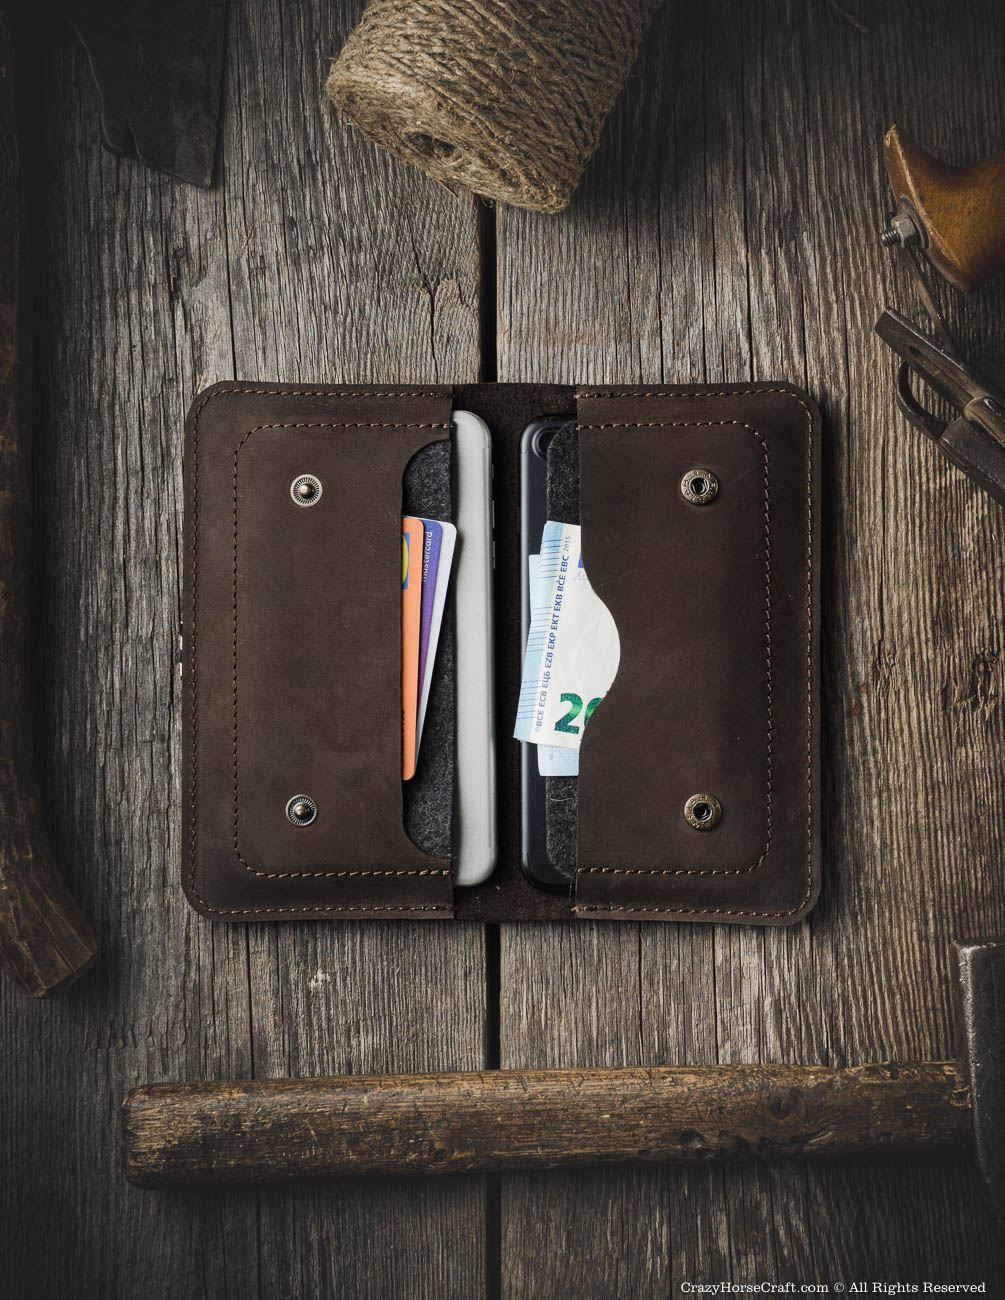  Double Decker - Custom Handcrafted Dual Phone Leather  Holster Pouch for Carrying 2 Smartphones